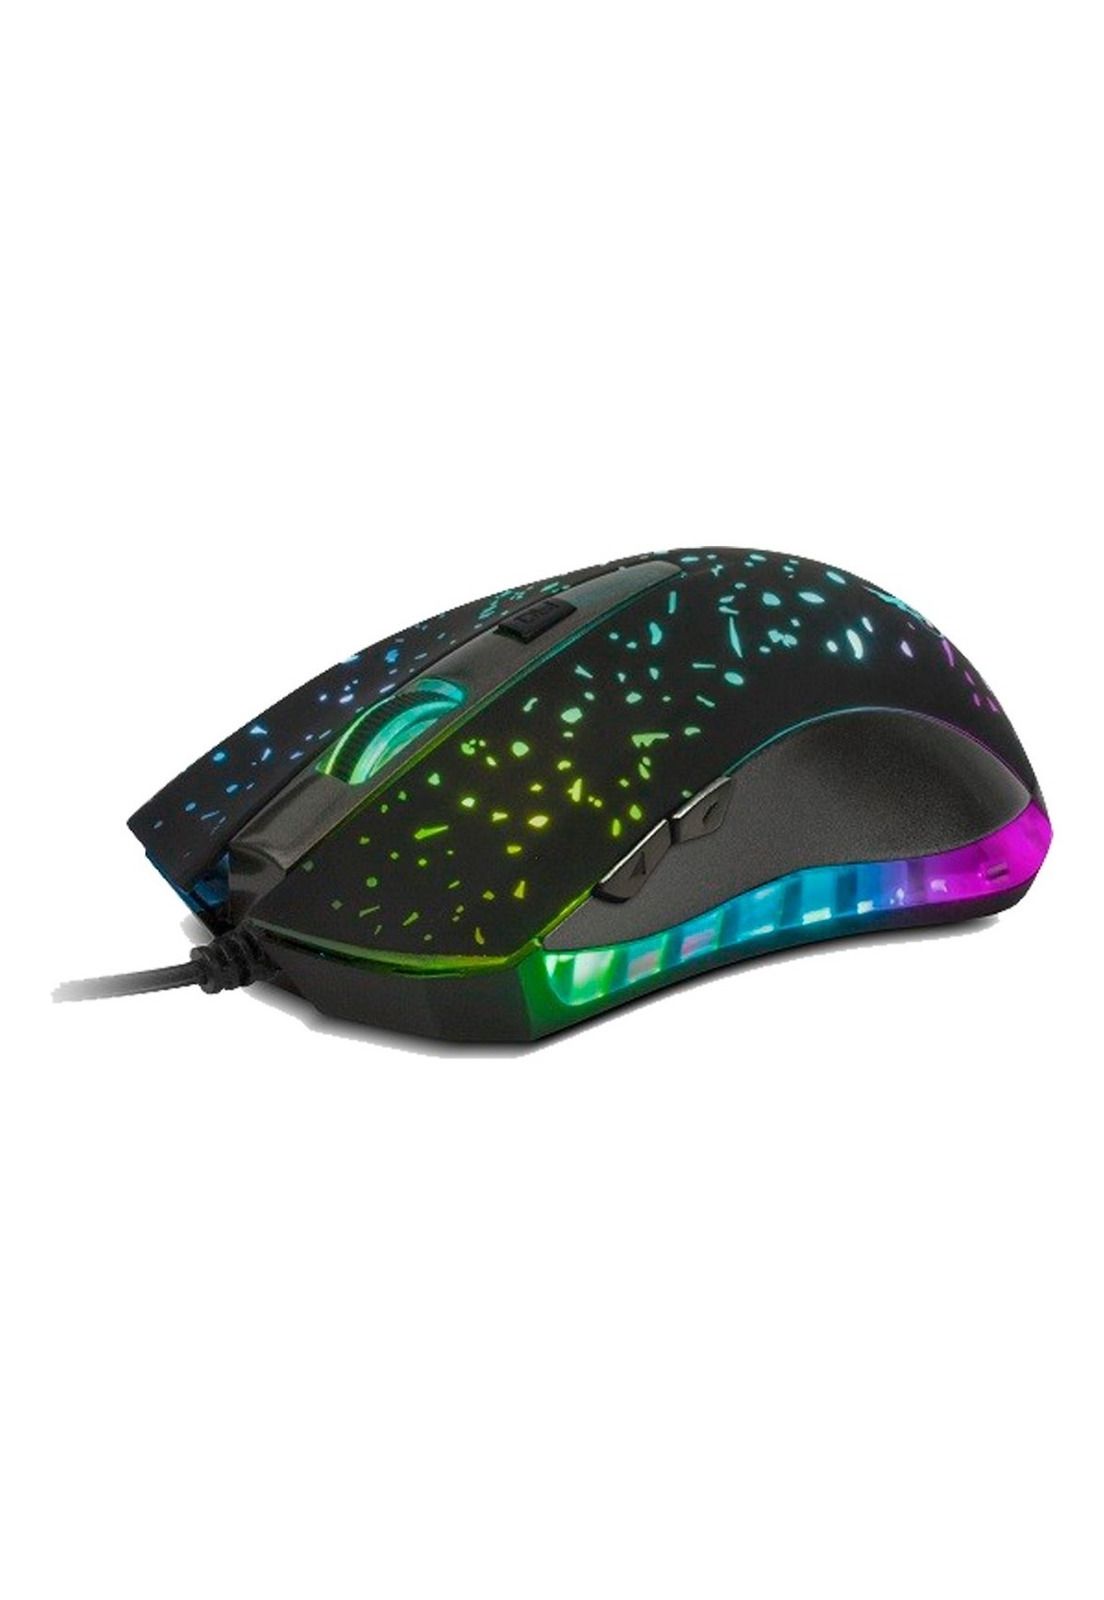 Mouse Gamer Optico Wired Usb X-tech Xtm-410 7 Colores